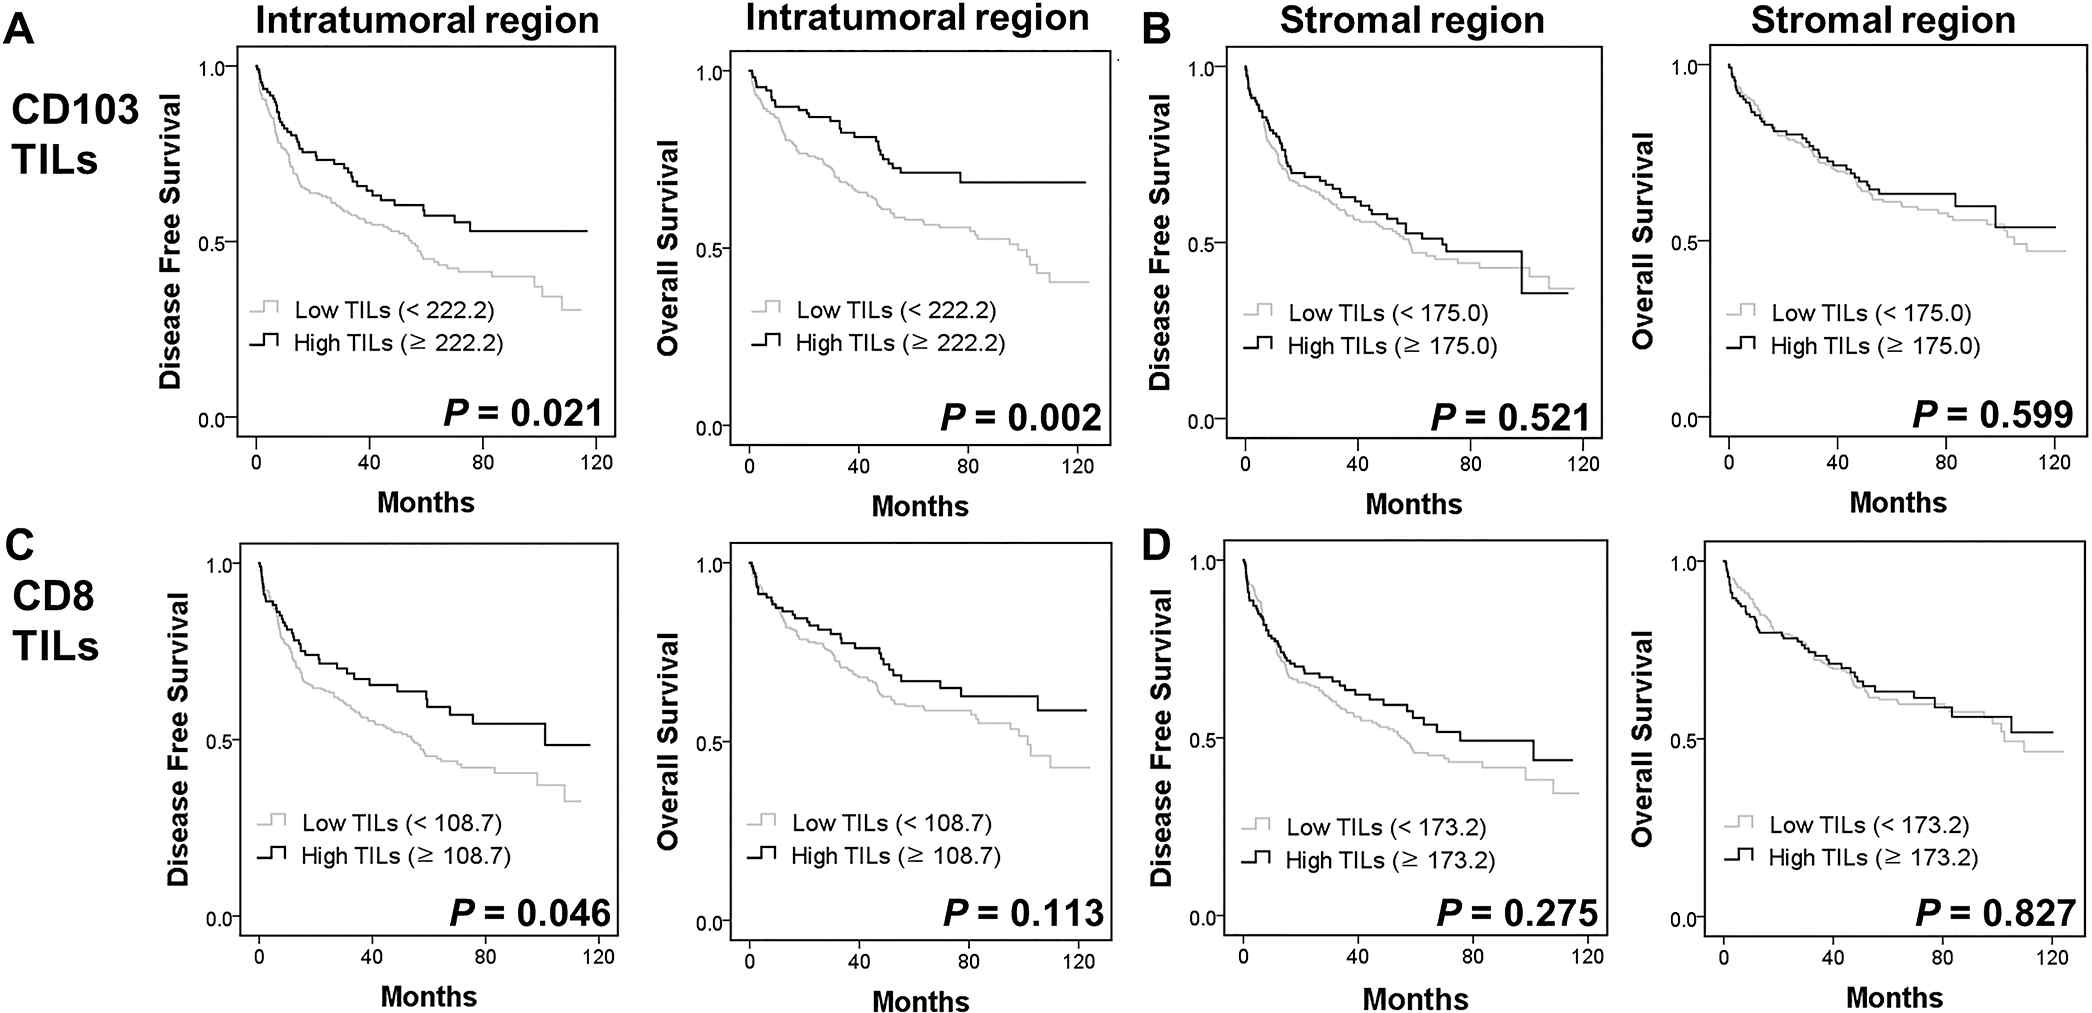 Kaplan-Meier plots using the log rank test for disease-free survival (DFS) and overall survival (OS) in patients with pulmonary squamous cell carcinoma (n = 378) according to intratumoral and stromal CD103+ (A, B), and CD8+ TIL numbers (C, D)